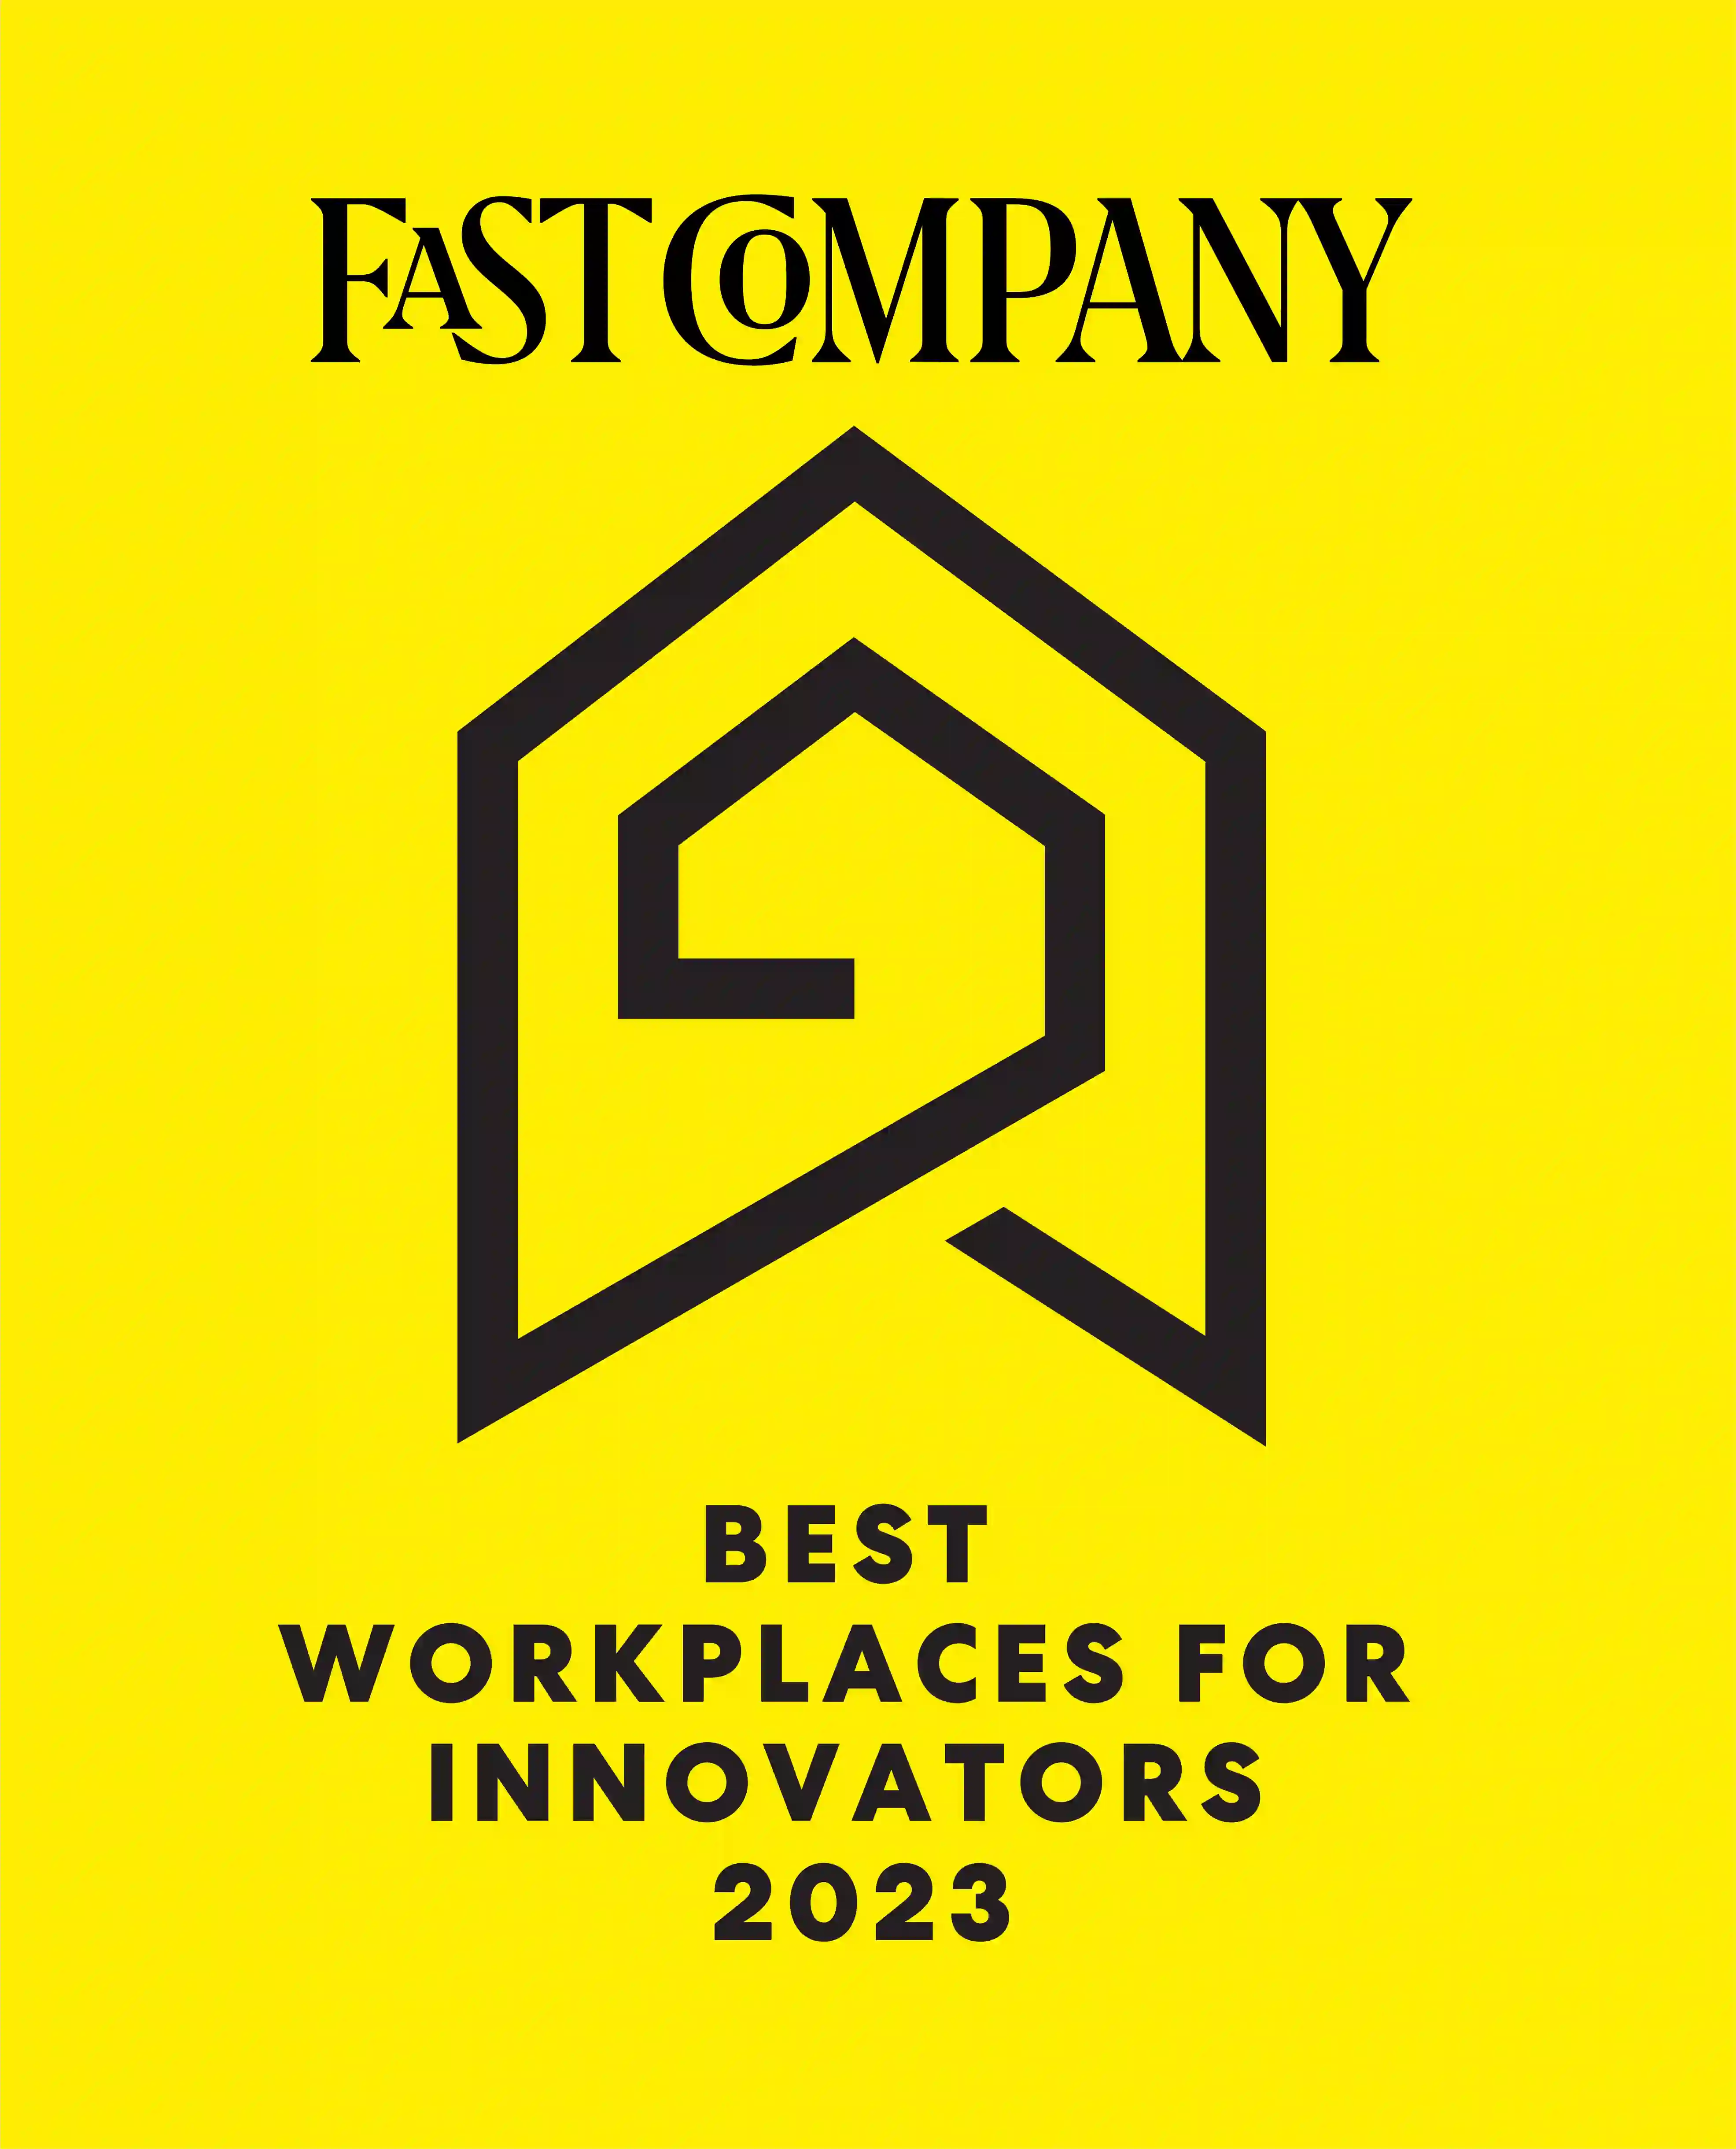 Fast Company Best Workplaces For Innovators 2023 Award